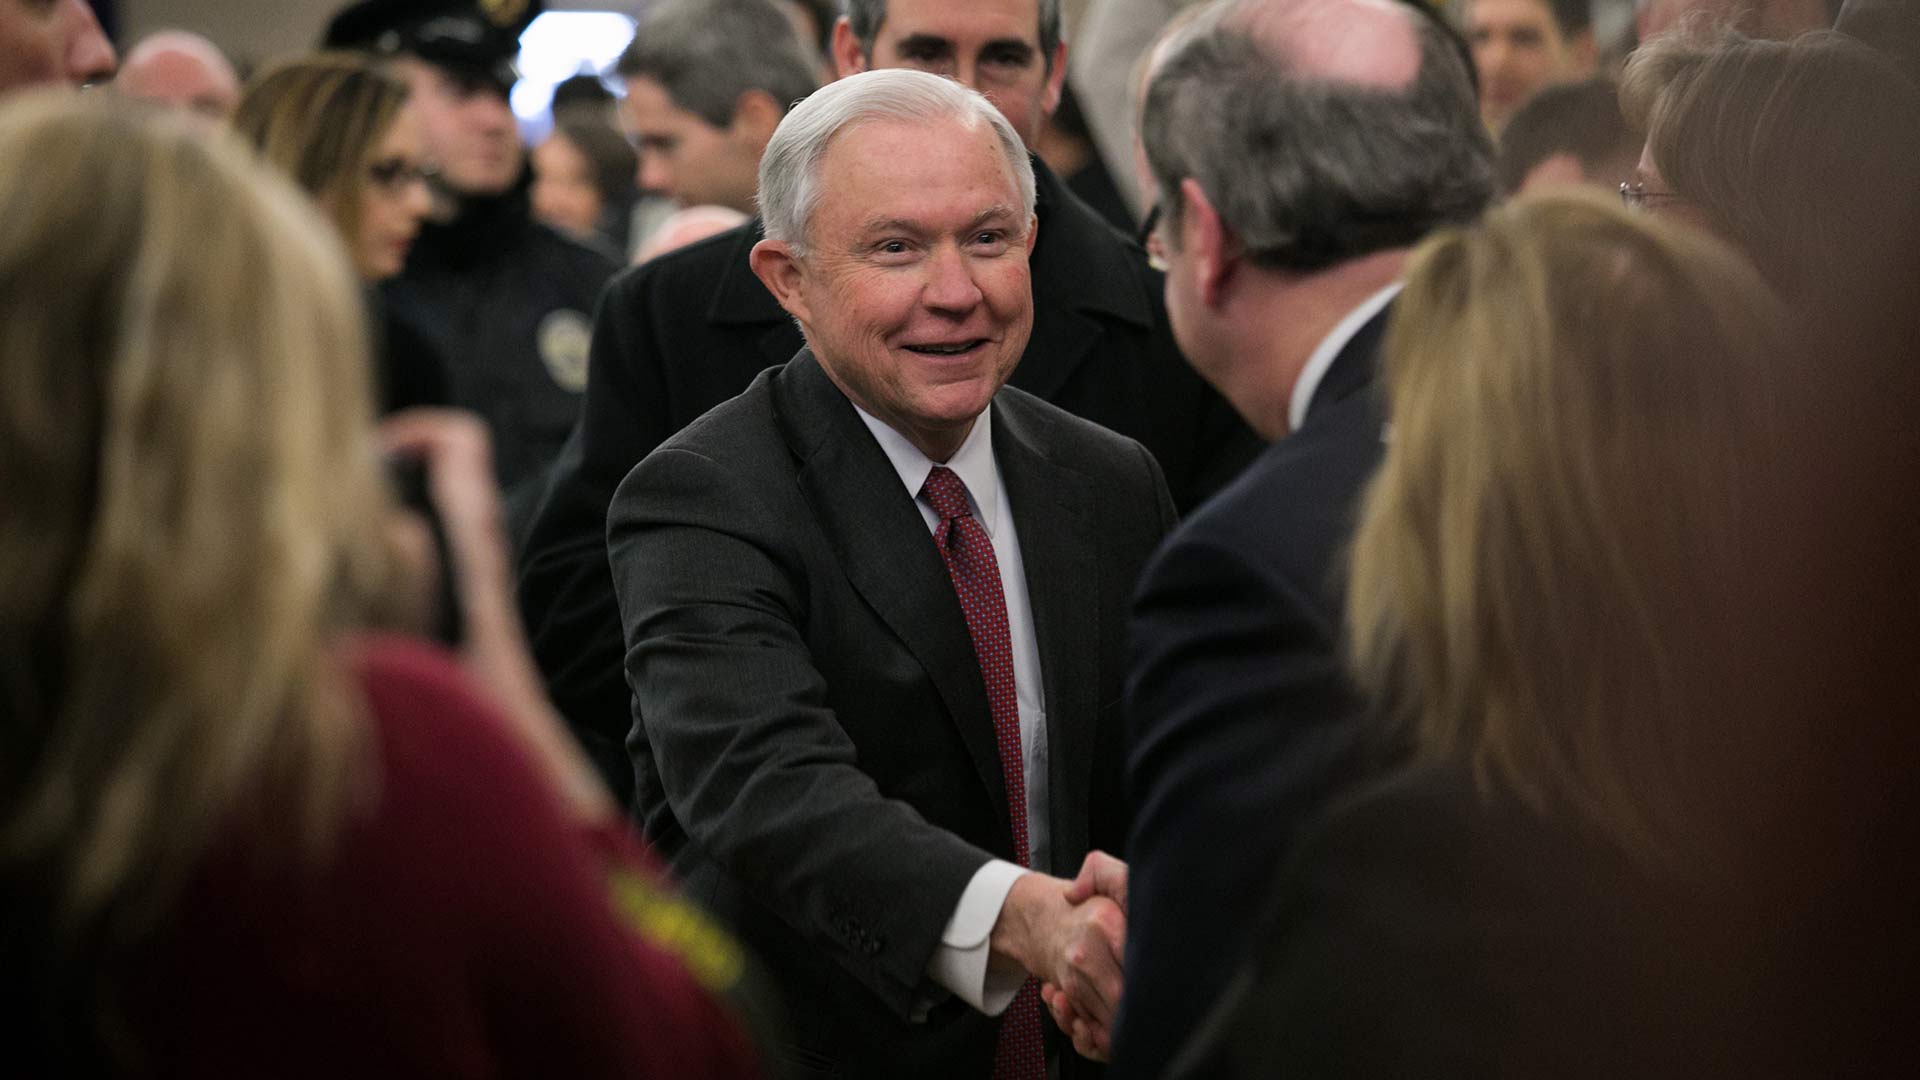 Attorney General Jeff Sessions after taking an oath of office, Feb. 9, 2017.